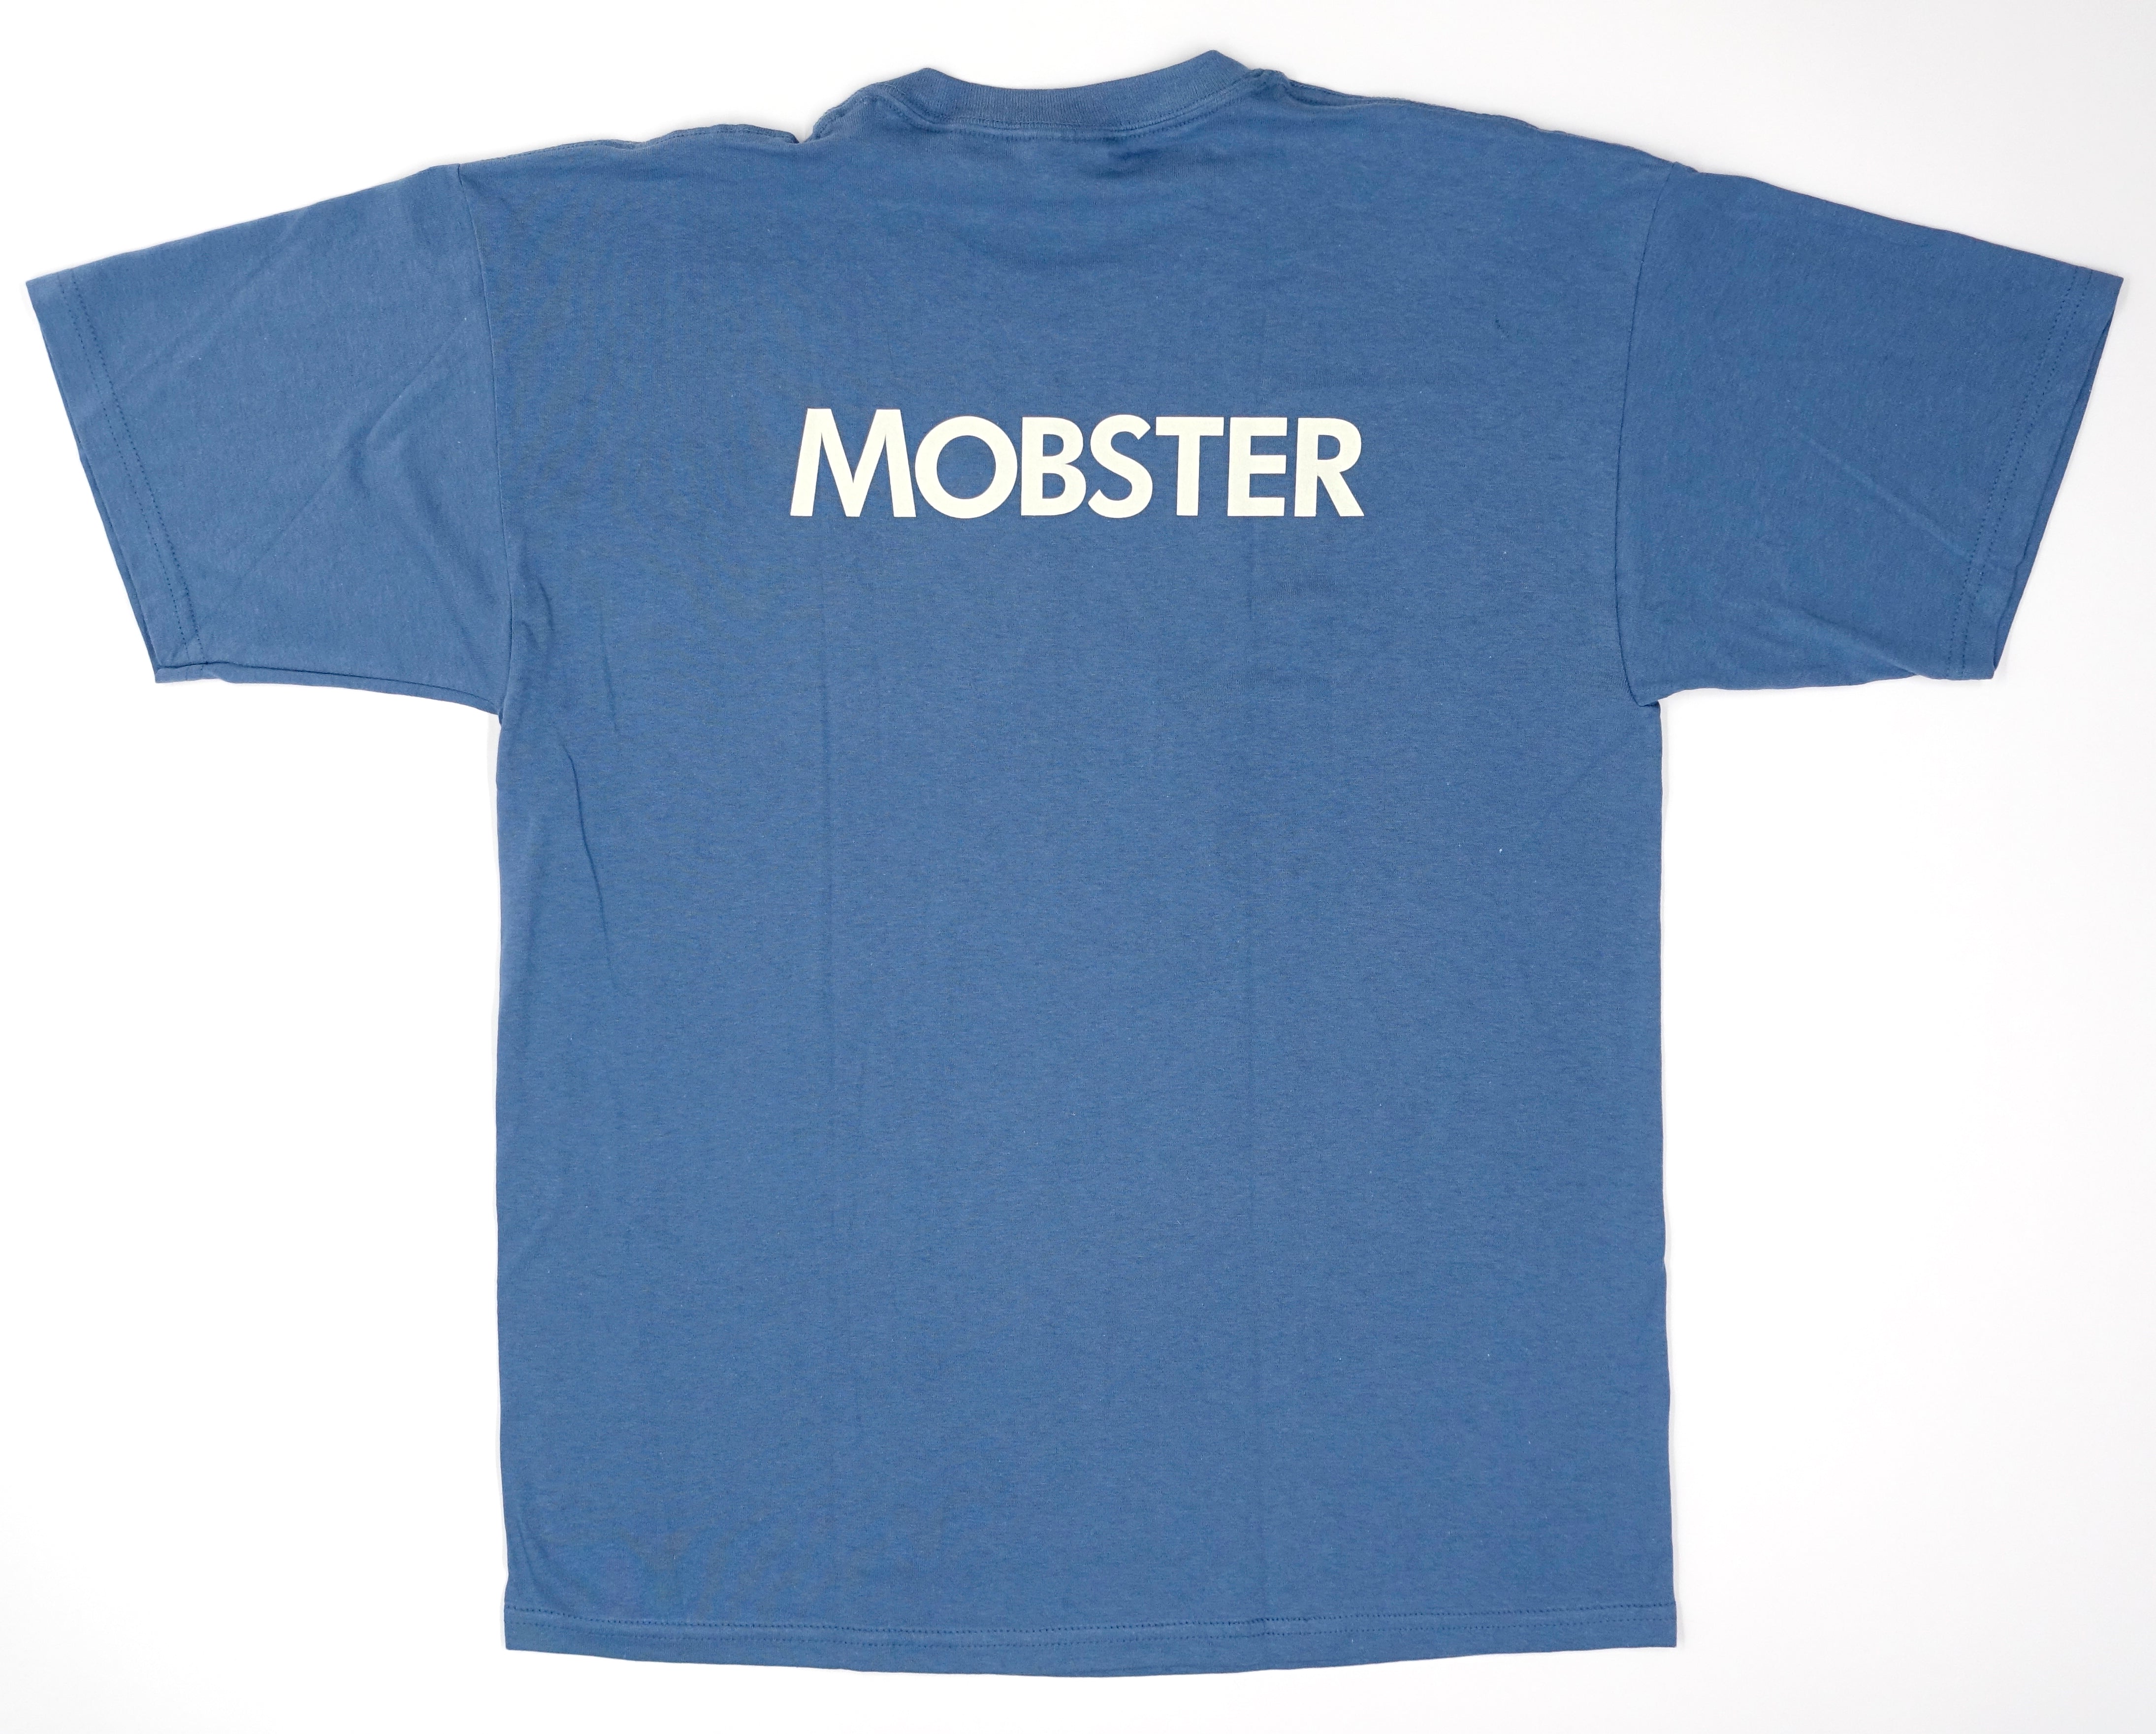 Kaiser Chiefs - Yours Truly, Angry Mob / Mobster 2007 Promo Tour Shirt Size Large